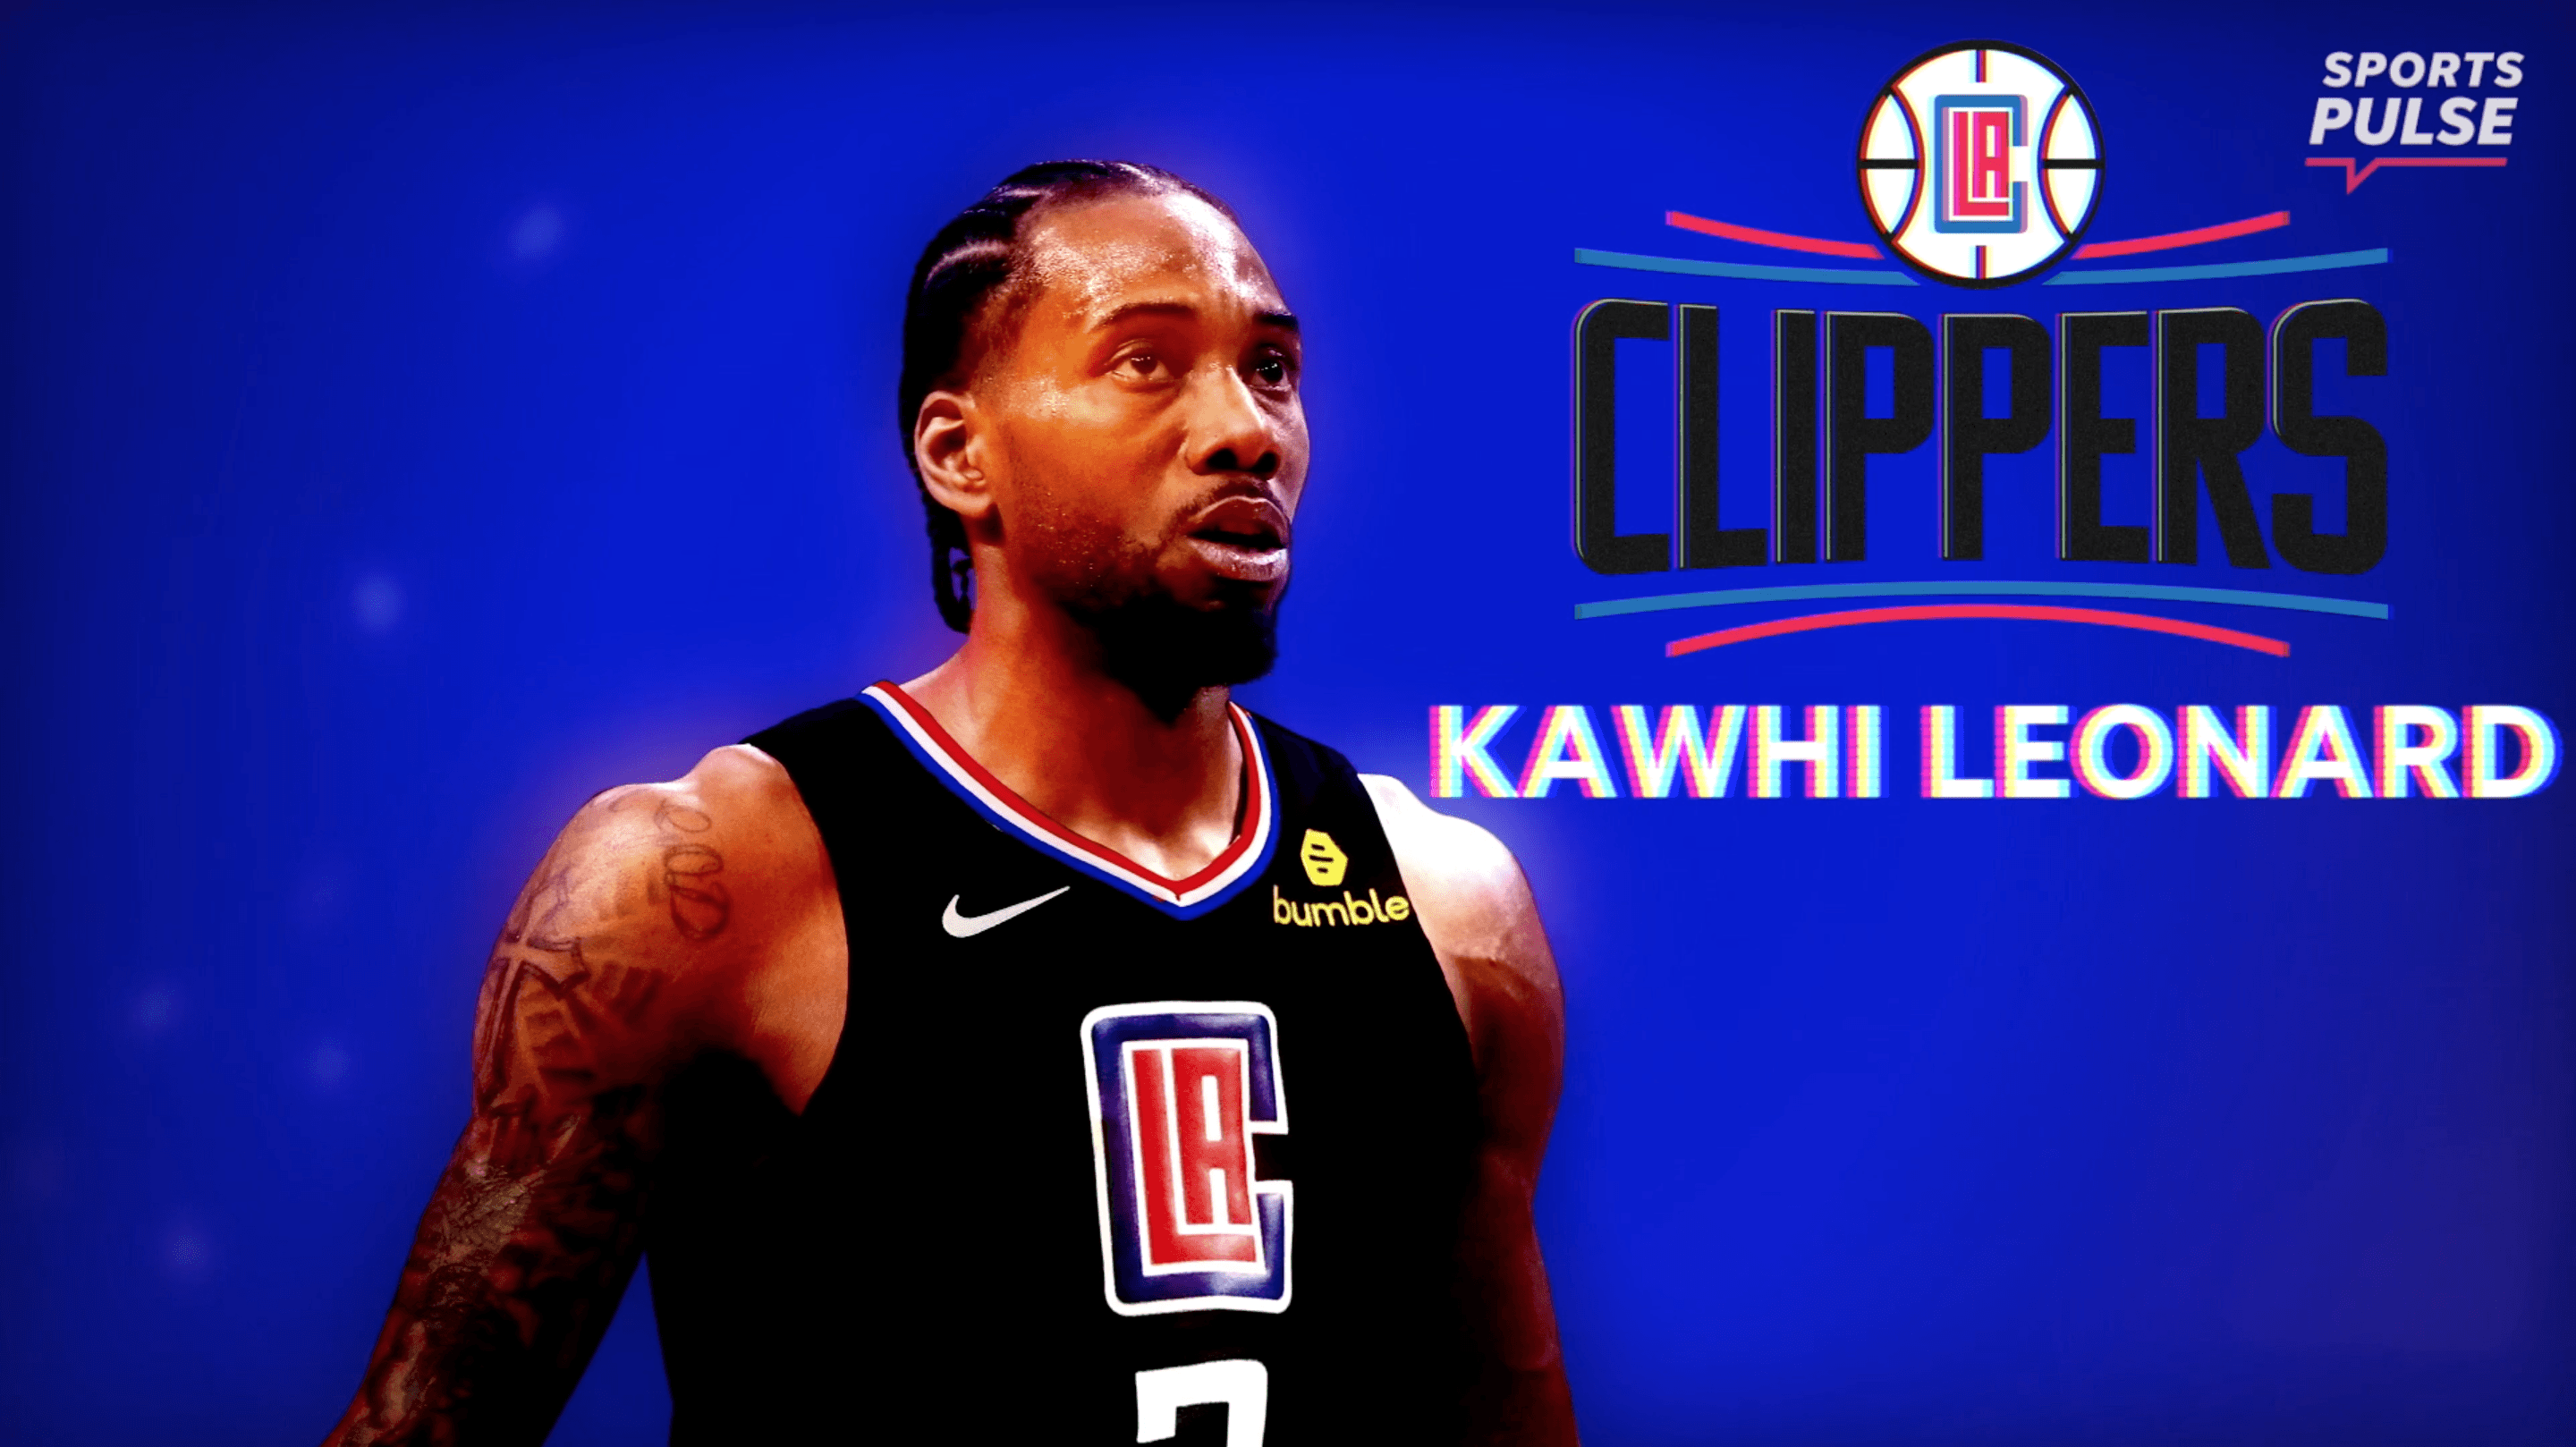 Kawhi Leonard joining L.A. Clippers